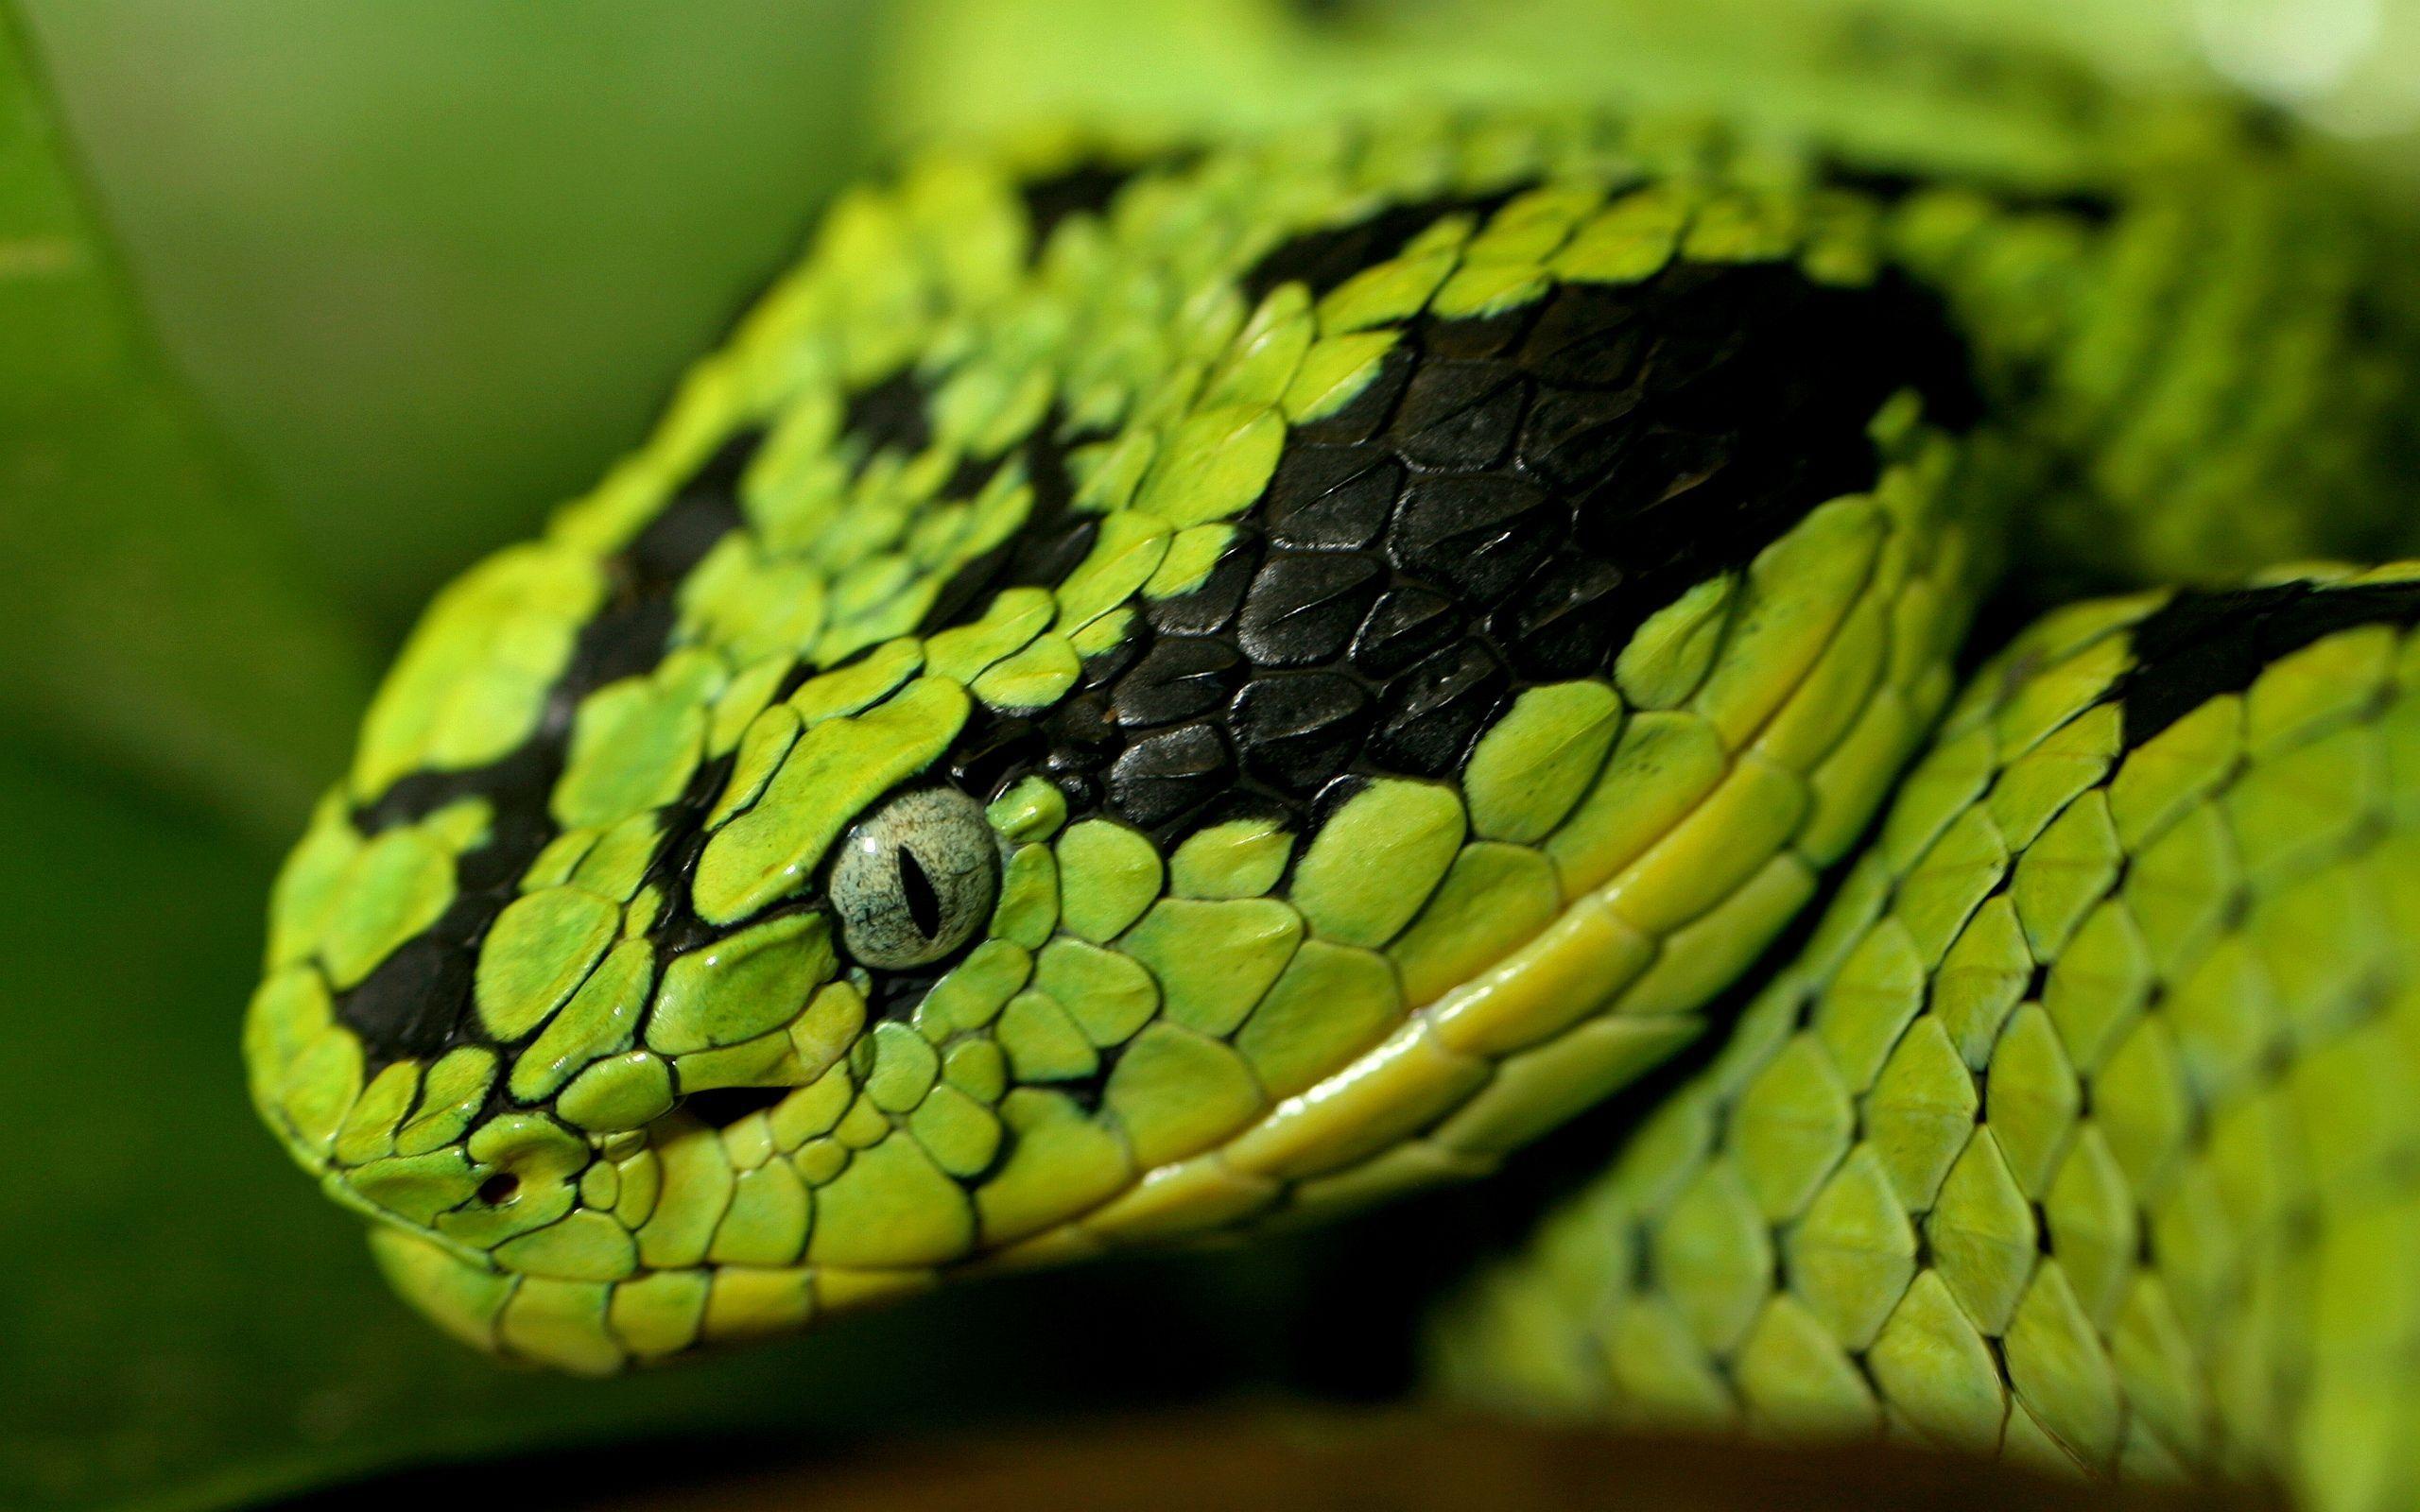 Colorful Snakes. Green Snake Head Wallpaper Picture Photo Image